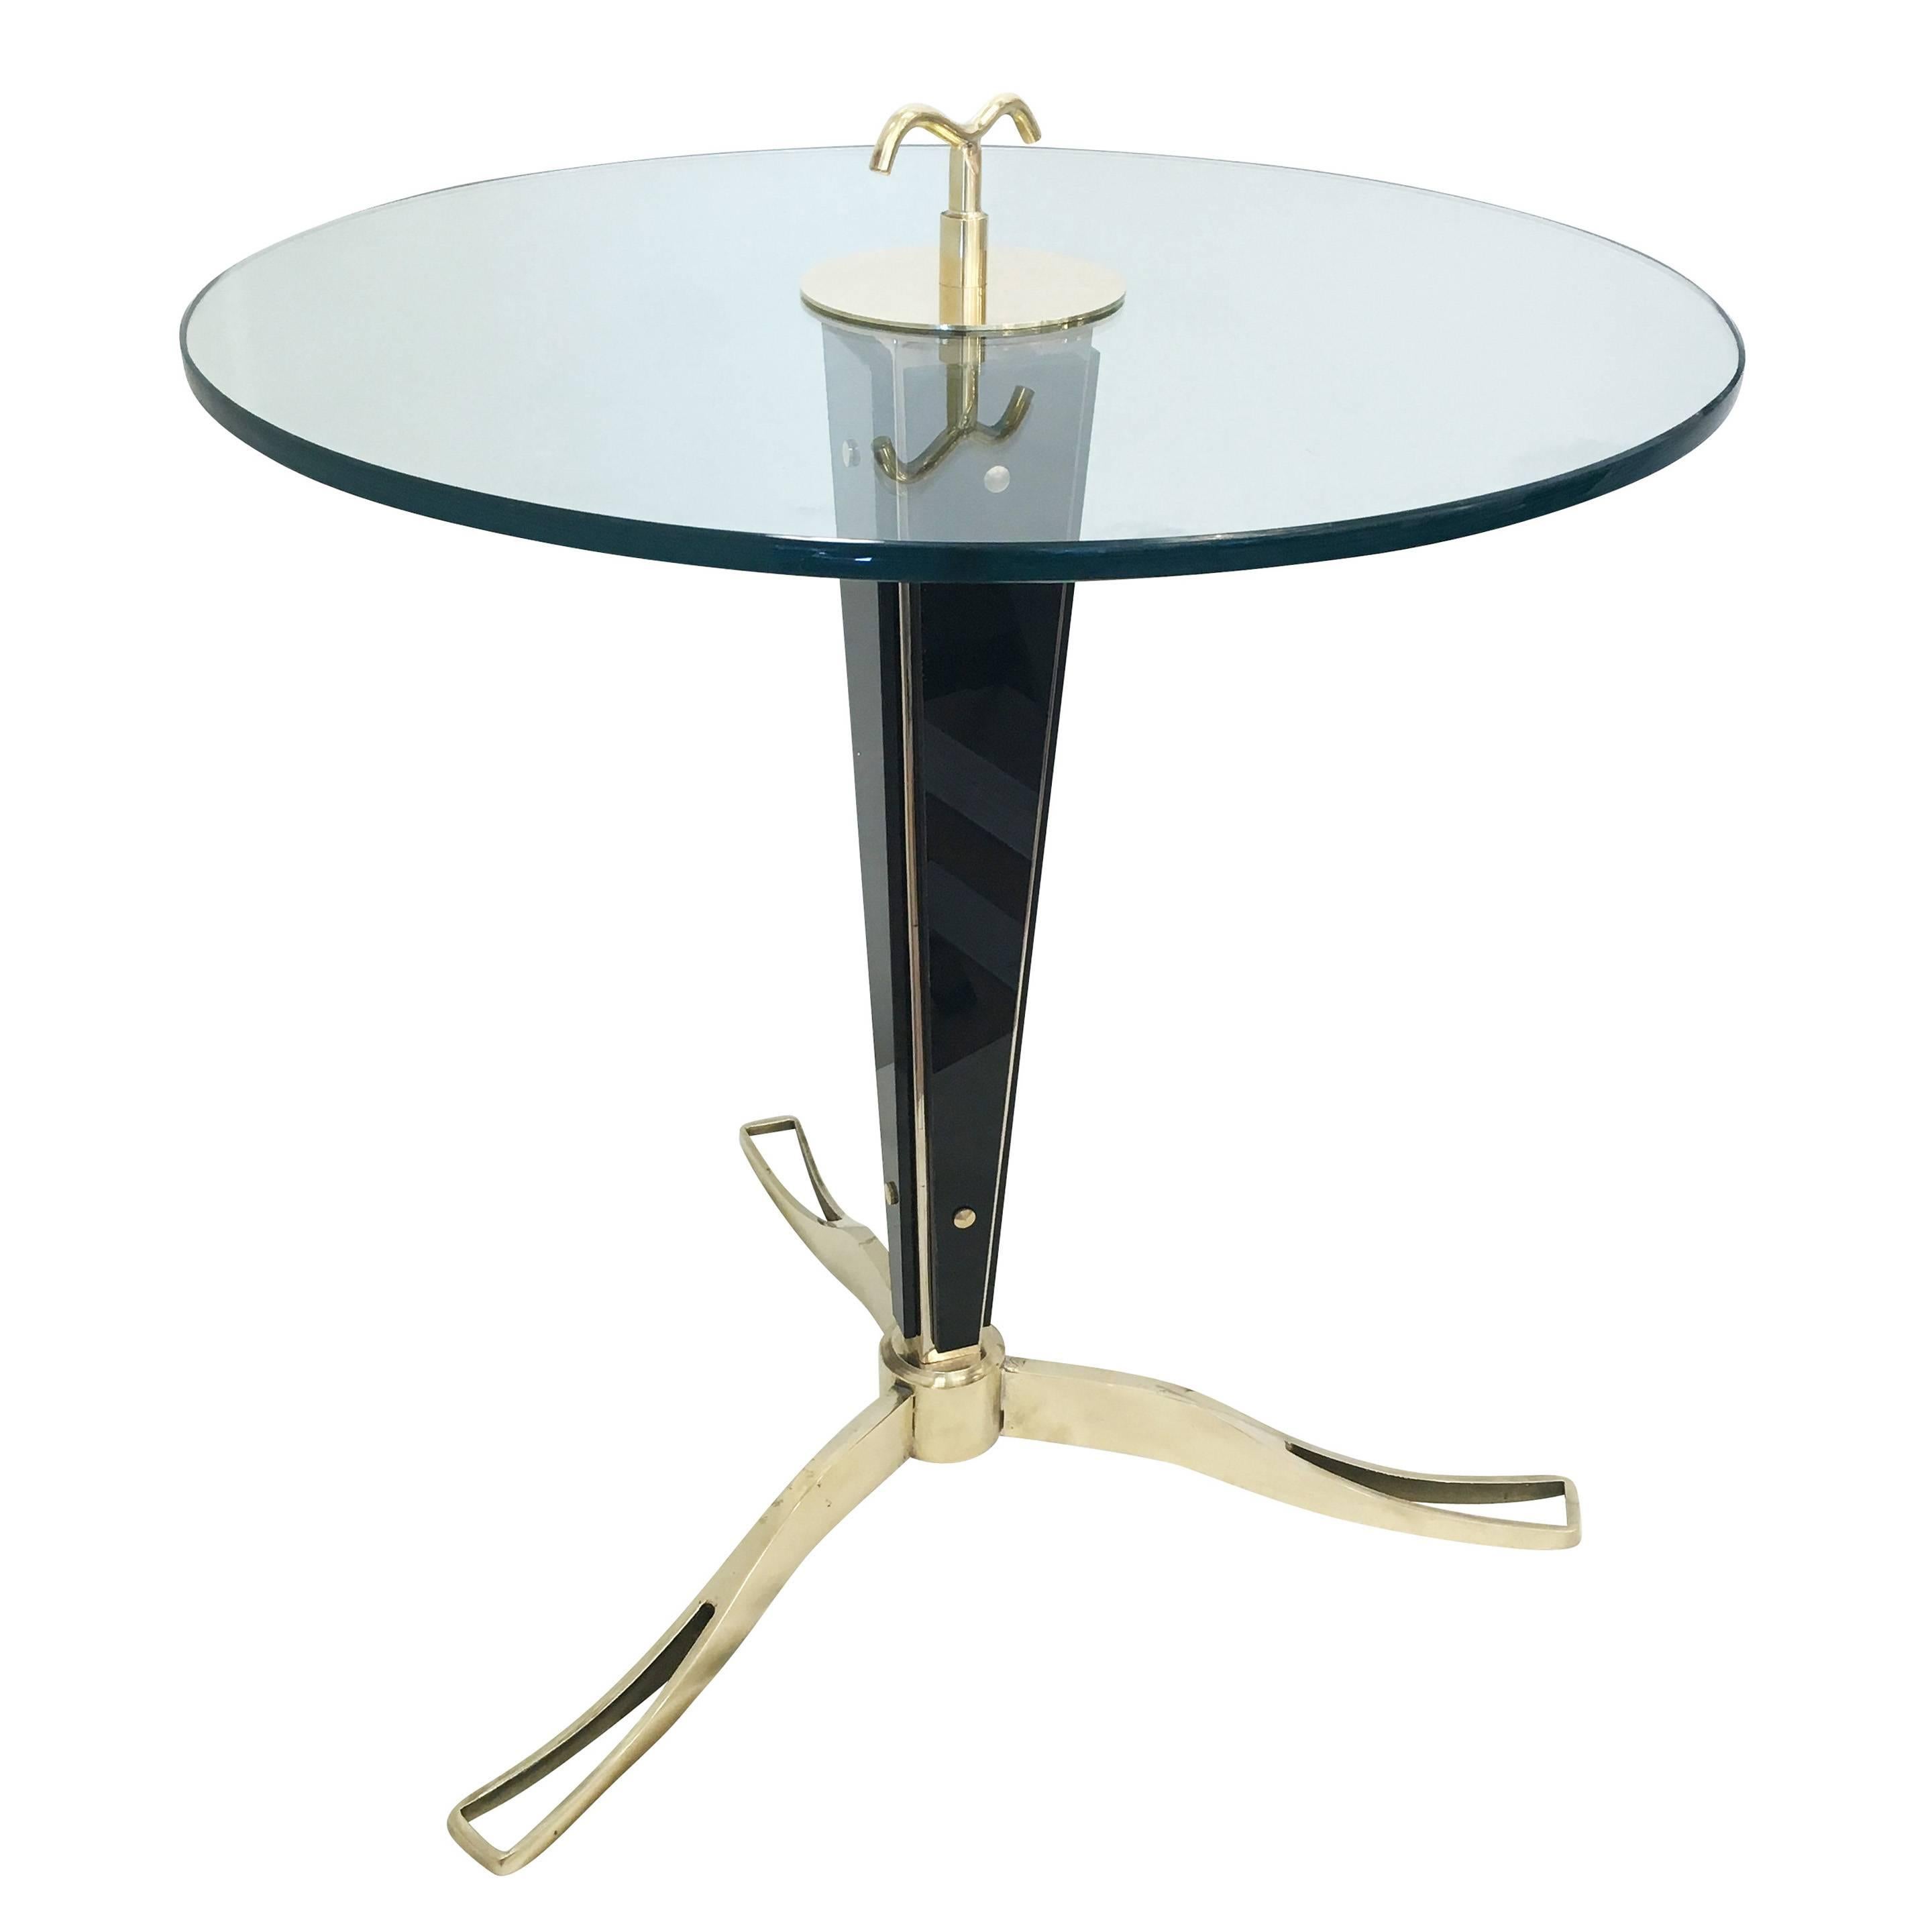 Glass and brass side table designed by Italian artisan Daniele Bottacin for Gaspare Asaro’s studio collection, formA. Each piece is composed of a brass frame holding four pieces of black glass and has a beautifully detailed base and